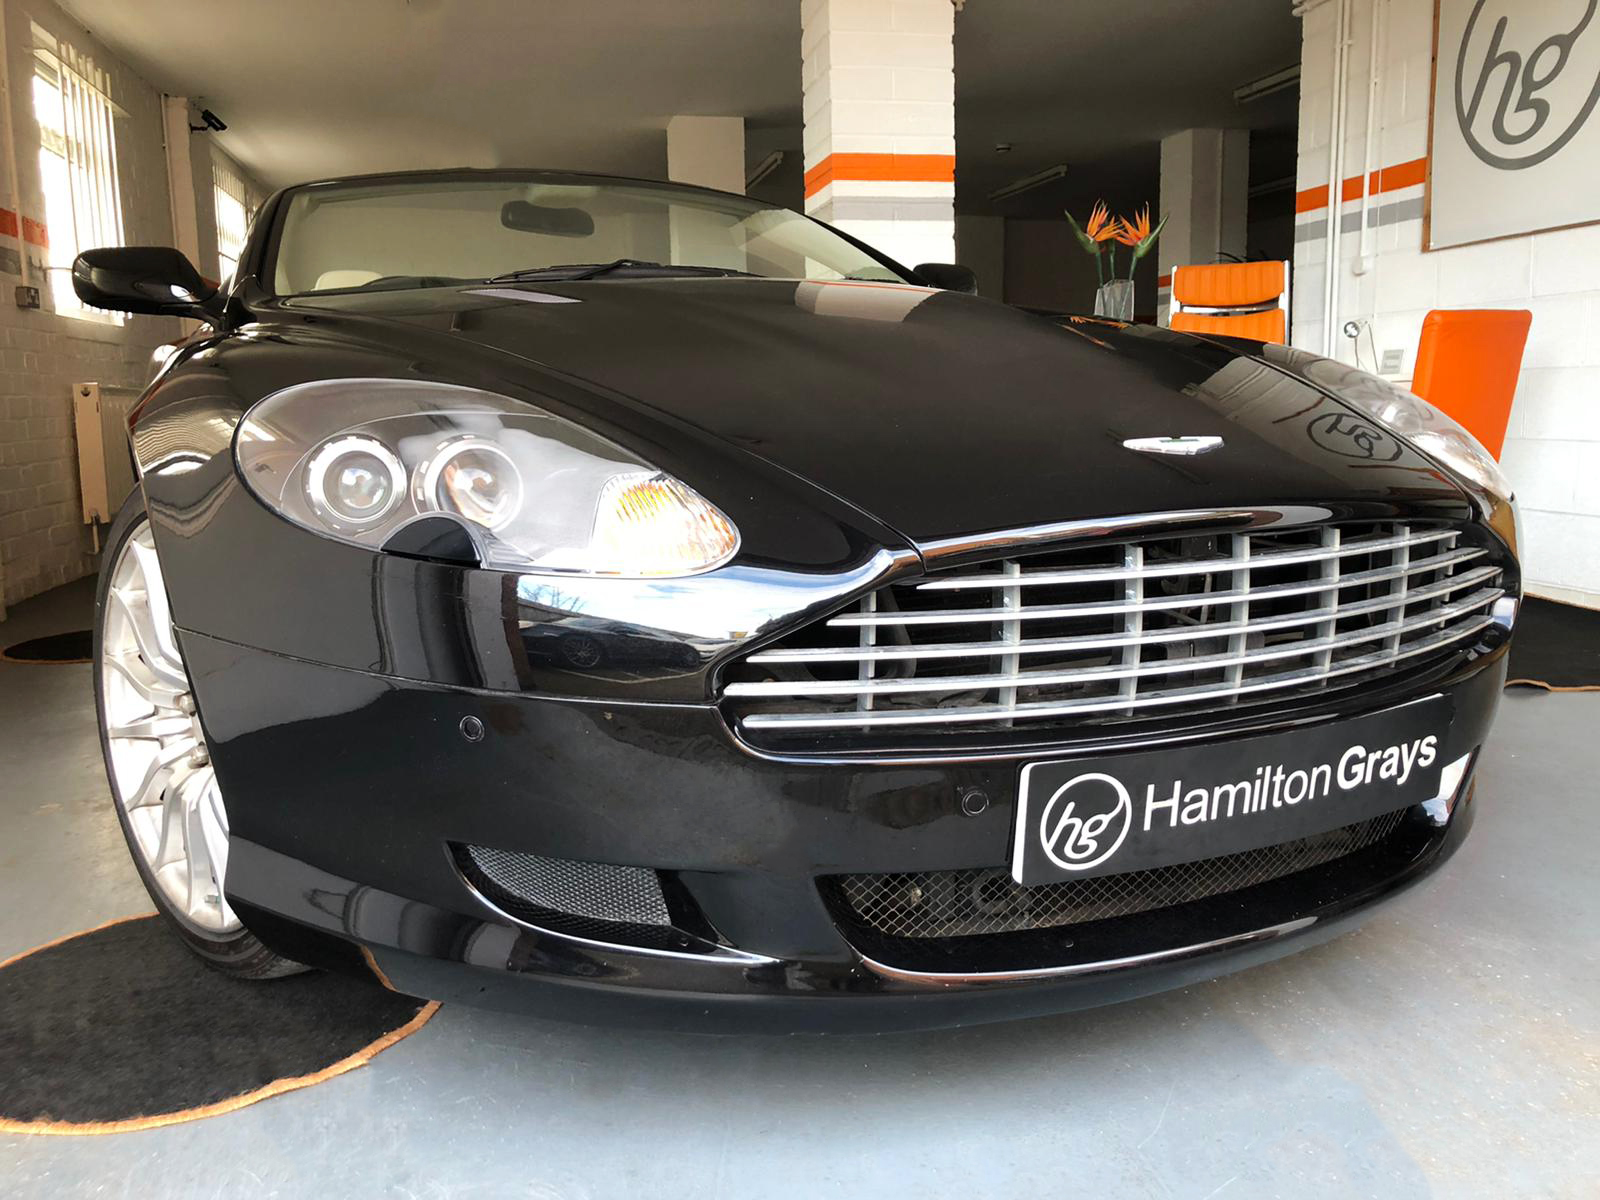 2006 (06) Aston Martin DB9 5.9 V12 Volante. Onyx Black with Full Cream Truffle Leather Upholstery. FAMSH. 45k. Just been Serviced.. (SOLD)